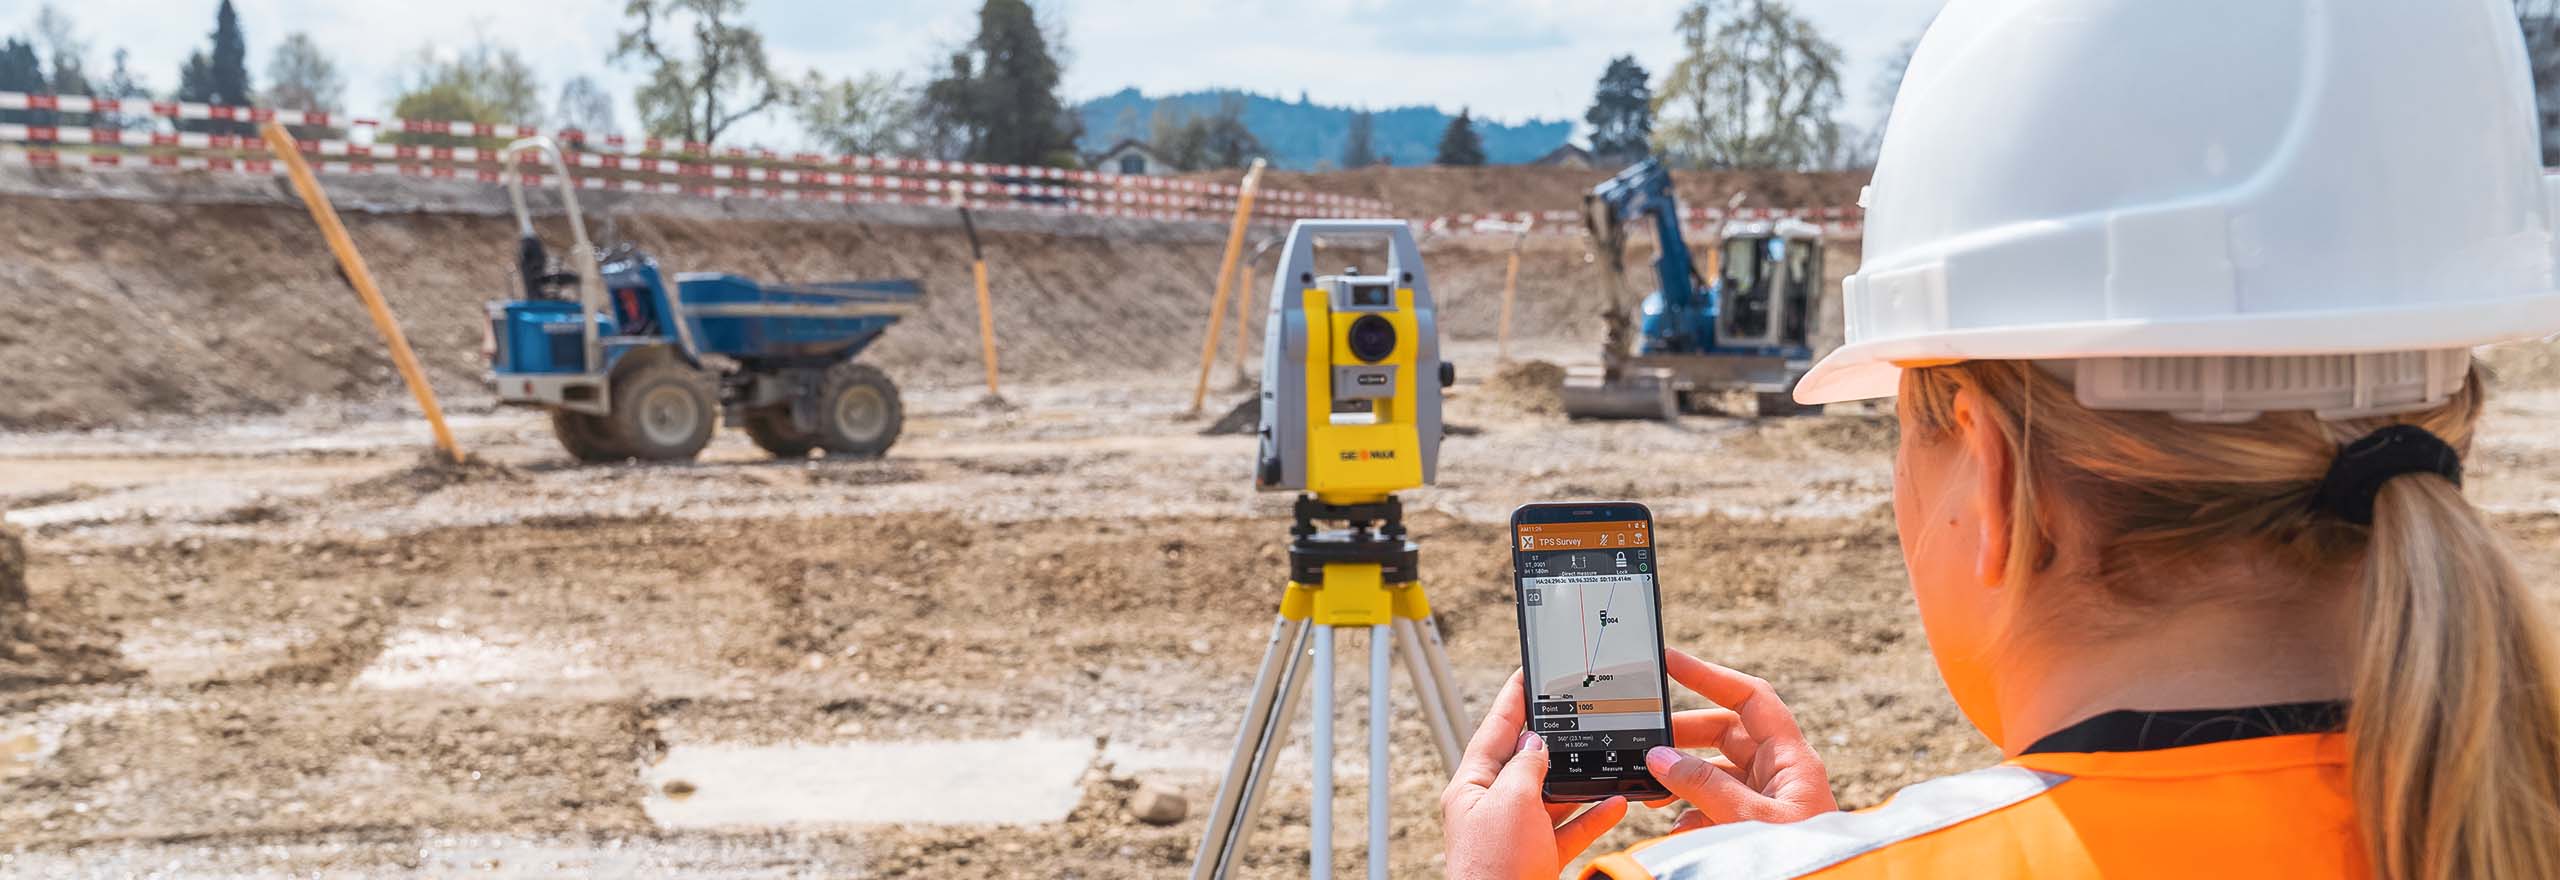 GeoMax Zoom95 Total Station on a construction site 